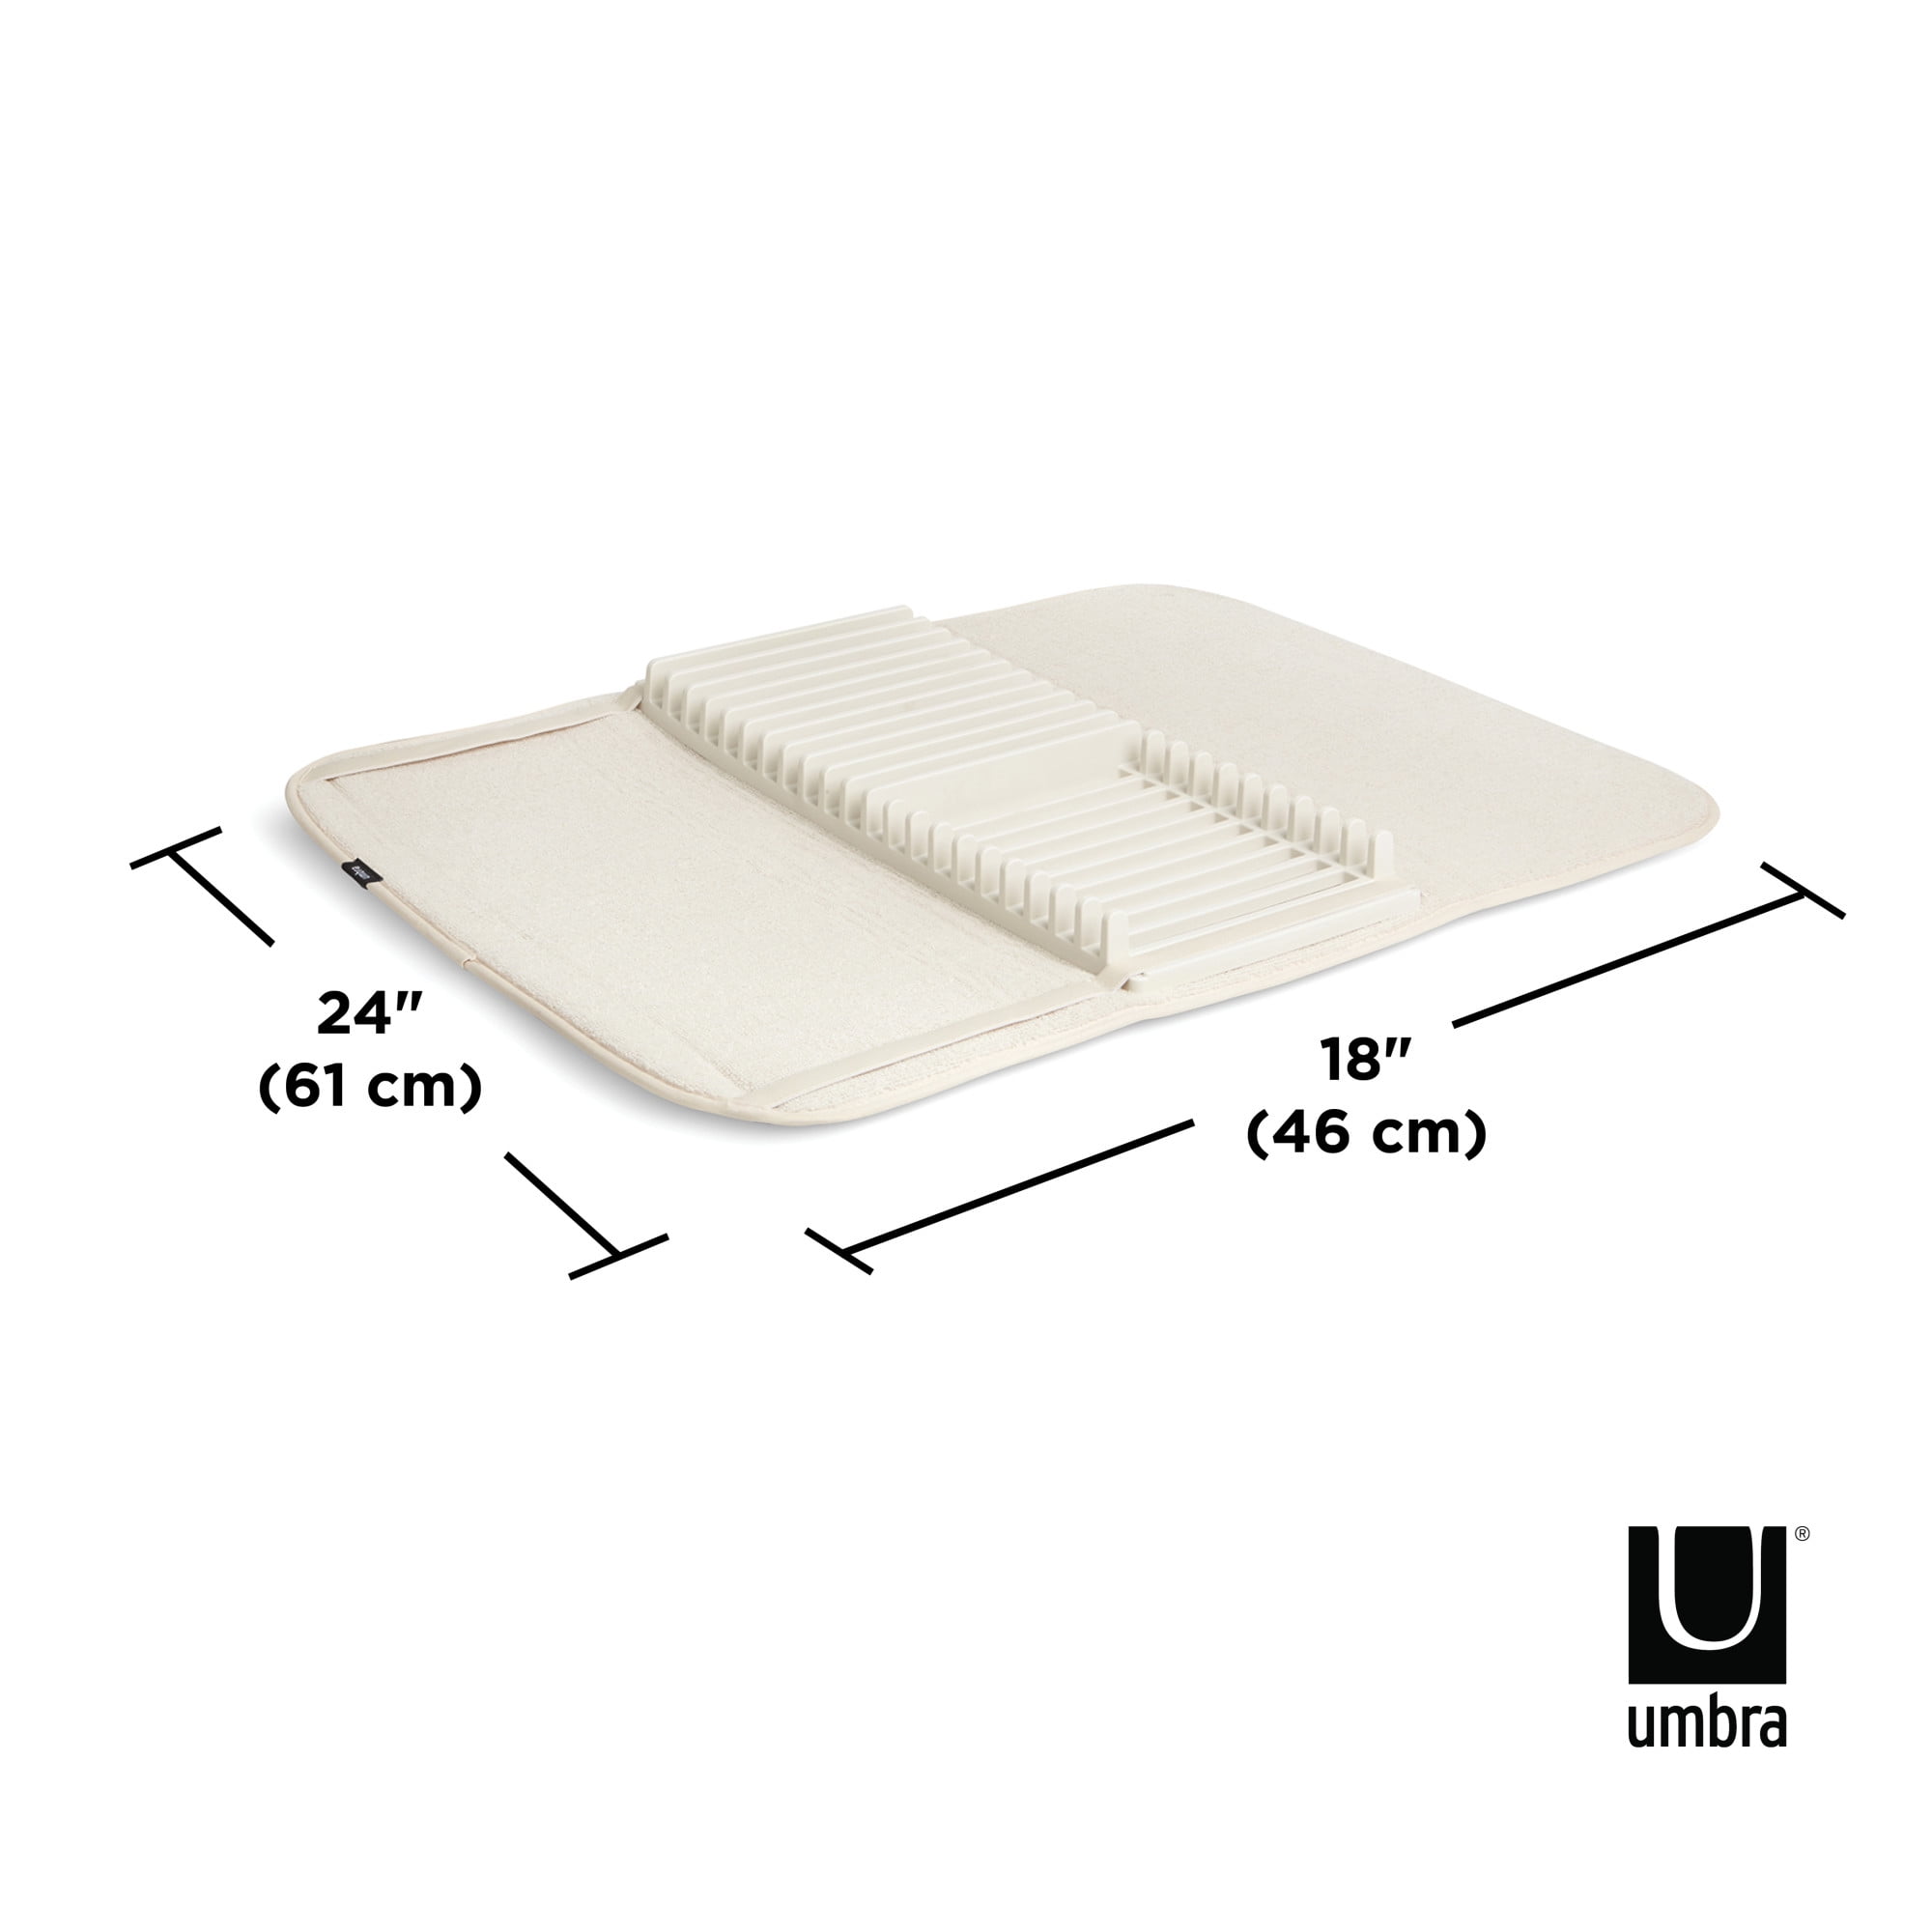 Umbra 330720-354 UDRY Rack and Microfiber Dish Drying Mat-Space-Saving  Lightweight Design Folds Up for Easy Storage, Standard, Linen